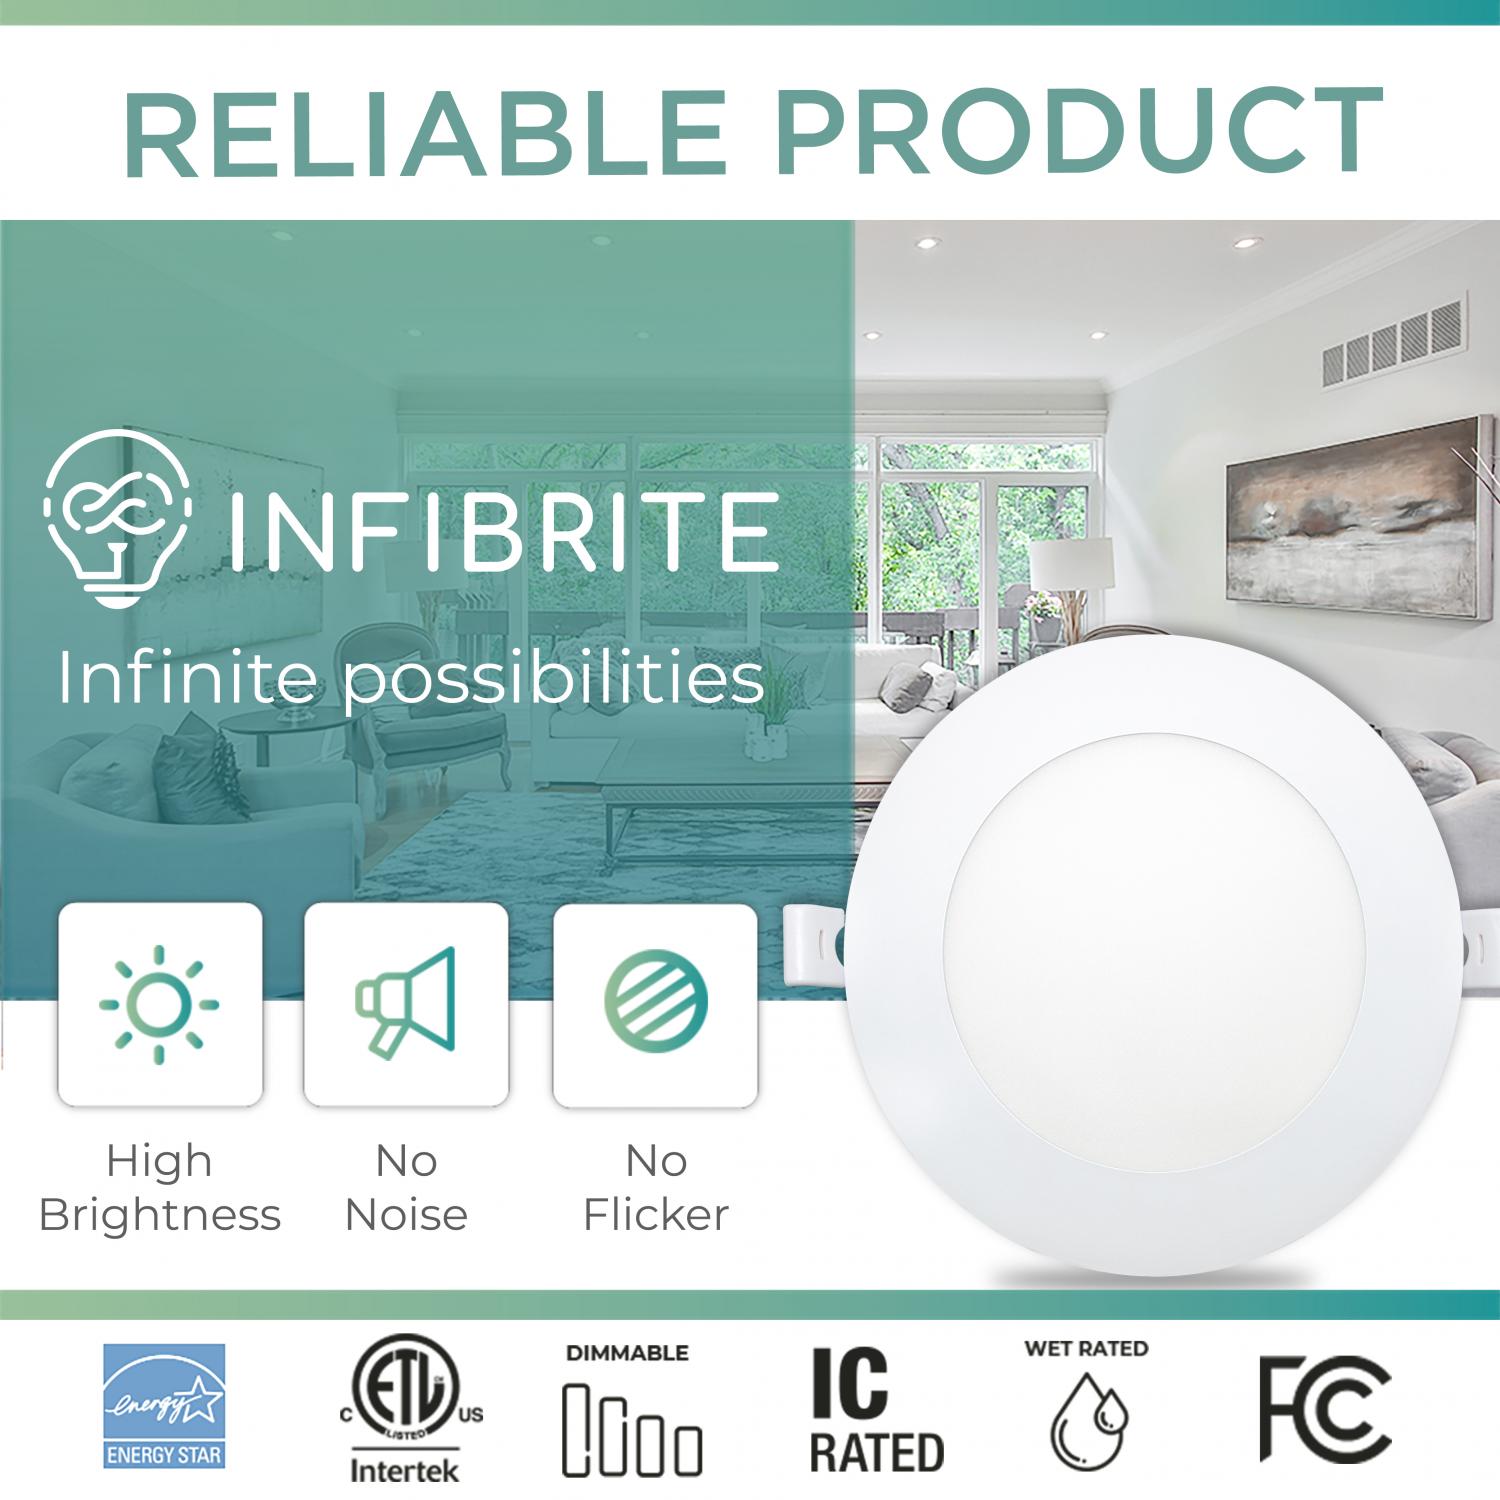 Infibrite 6 Inch 5000K Daylight 12W 1050LM Ultra-Slim LED Ceiling Light with Junction Box, Flush Mount, Dimmable, Fixture for Bedroom, Wet Rated for Bathroom, Easy Install, 110W Eqv, ETL & Energy Star, US Company